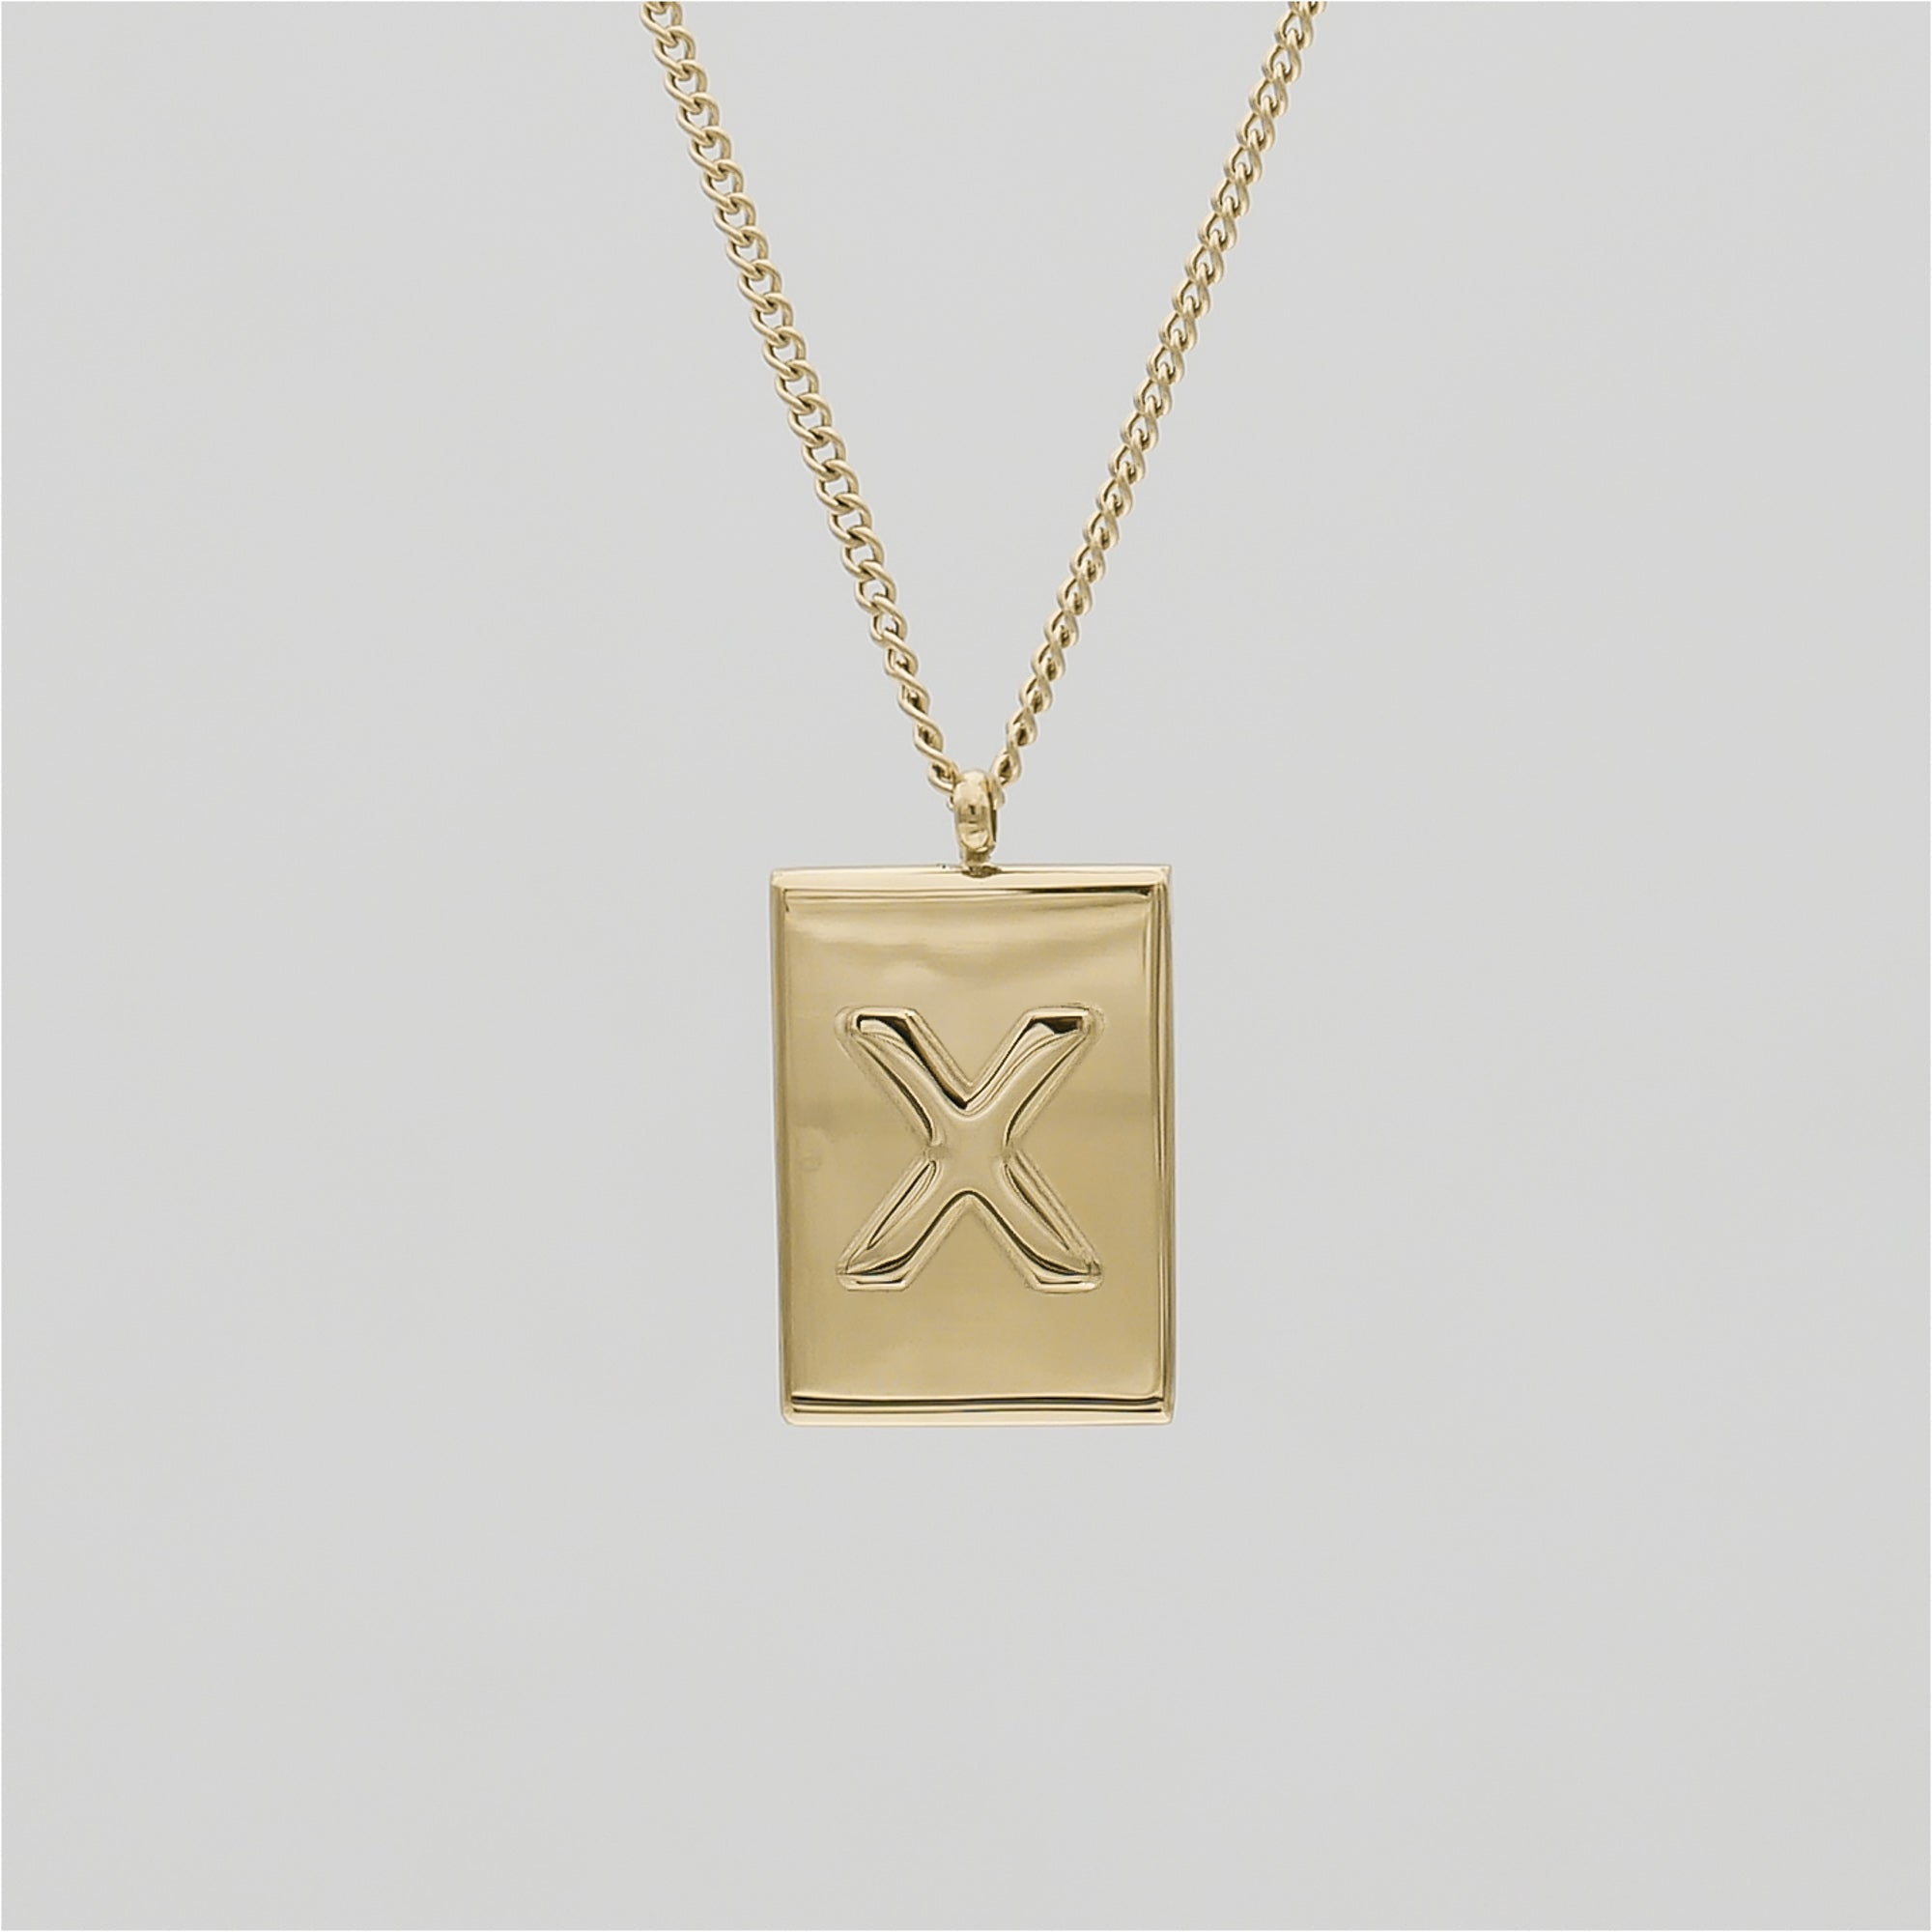 Athena custom initial Gold pendant Necklace, letter X by PRYA